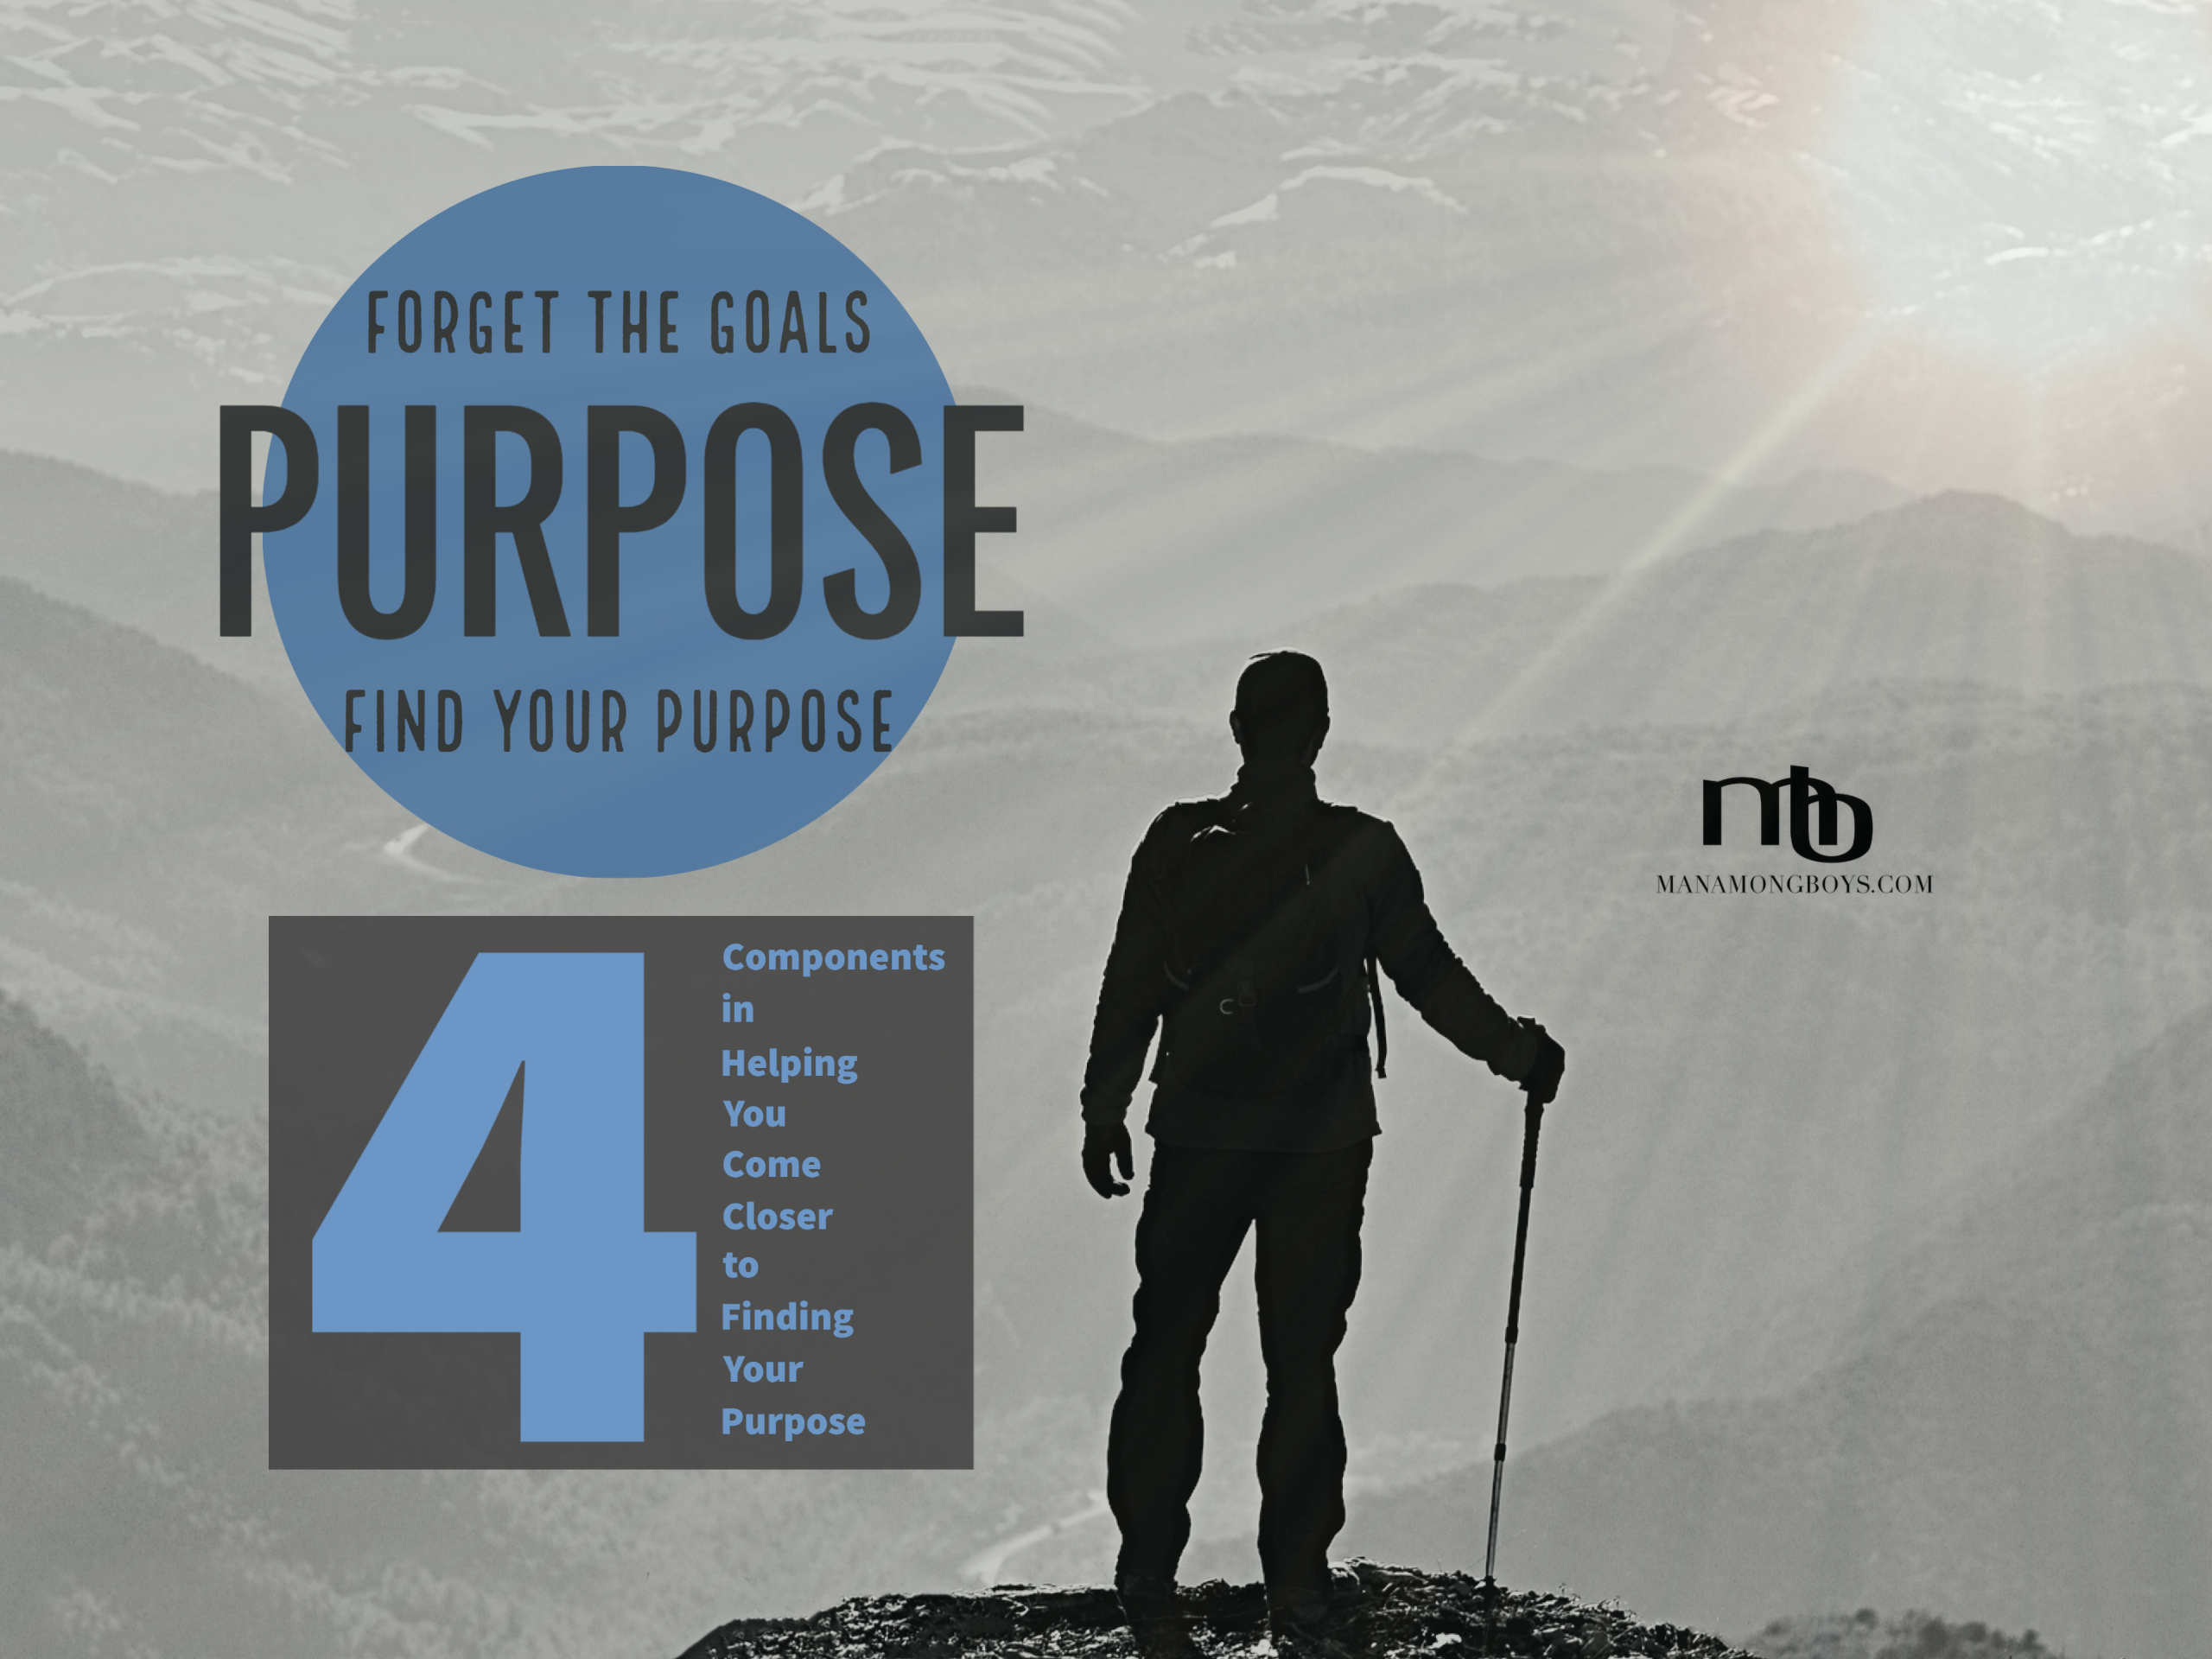 Forget the Goals.  Find Your Purpose.  4 Components in Helping You Come Closer to Finding Your Purpose